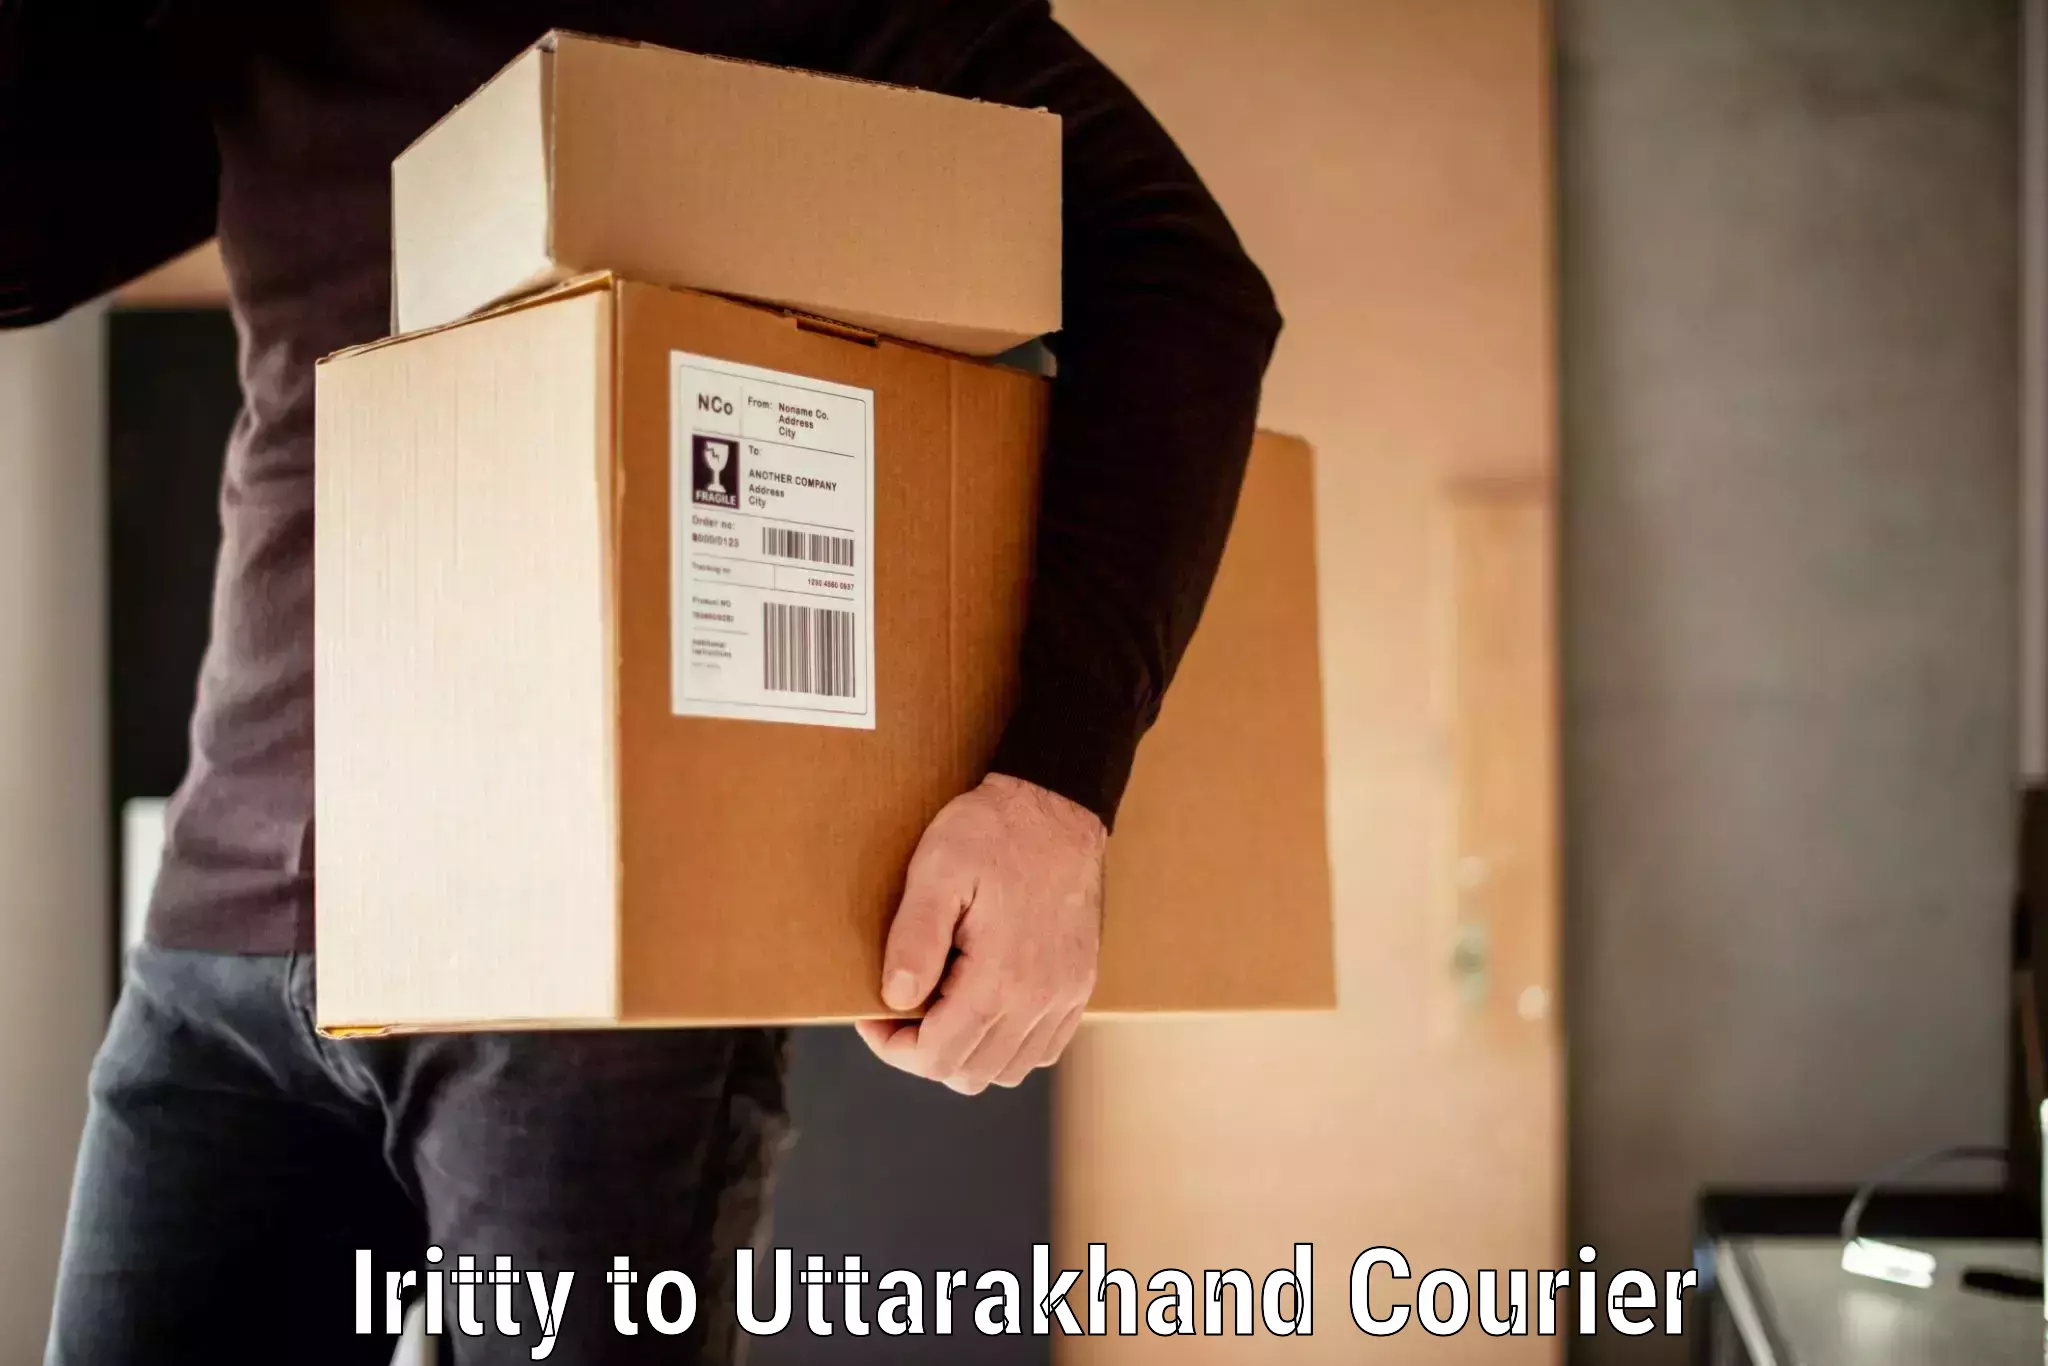 Luggage transport consulting in Iritty to Uttarakhand